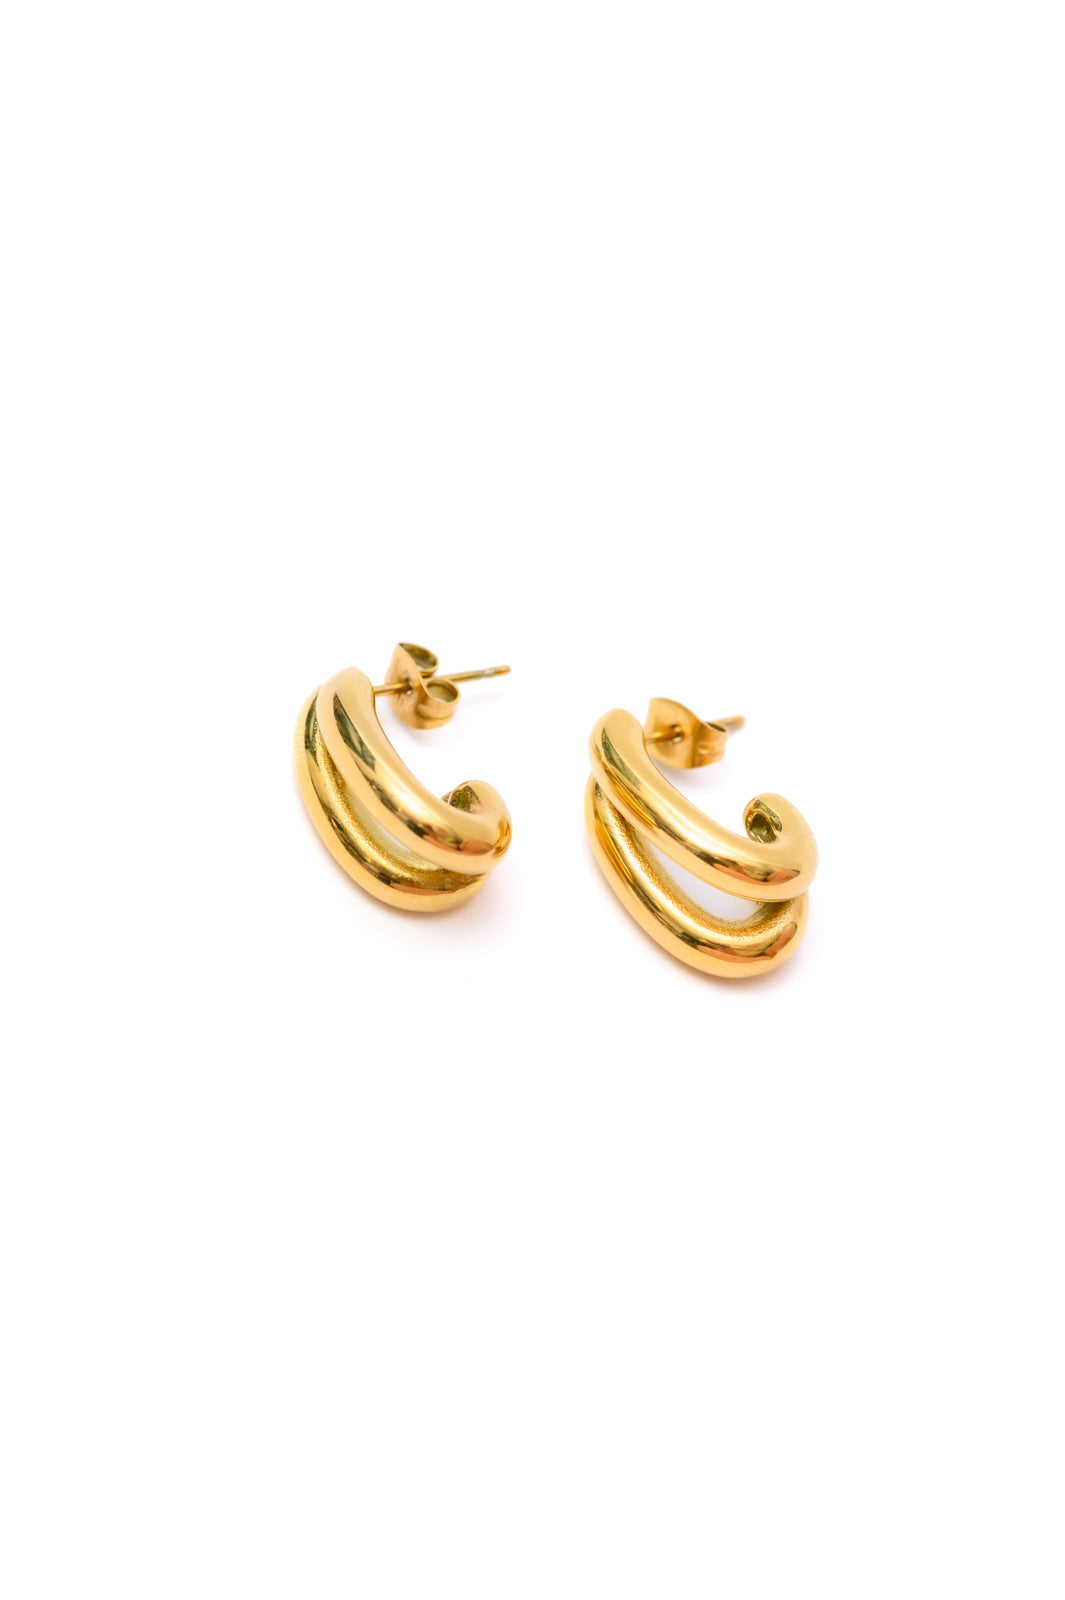 Pushing Limits Gold Plated Earrings - Southern Divas Boutique